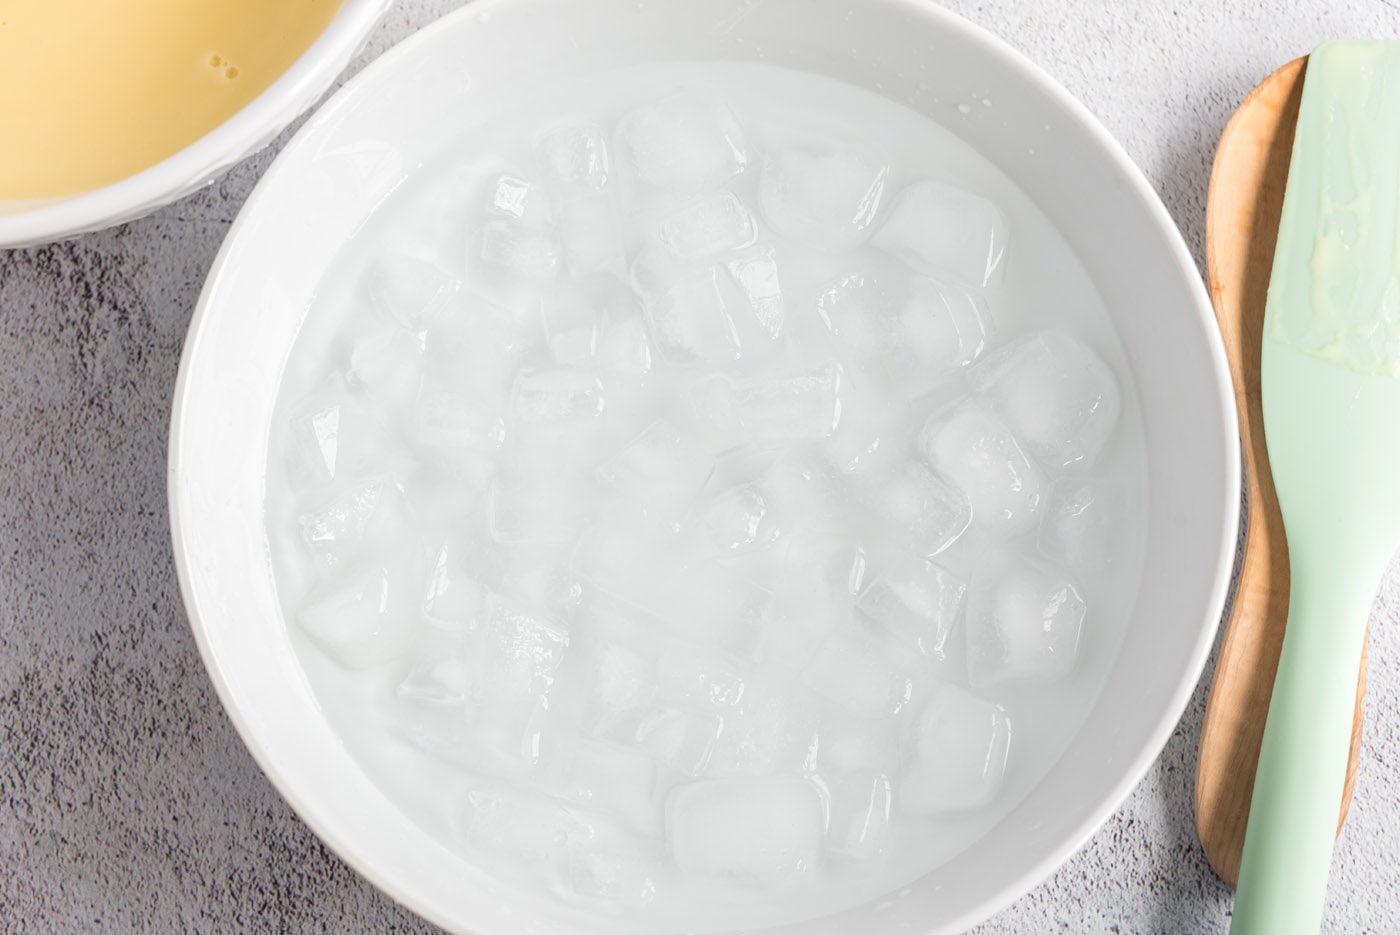 Photo of a bowl of ice water